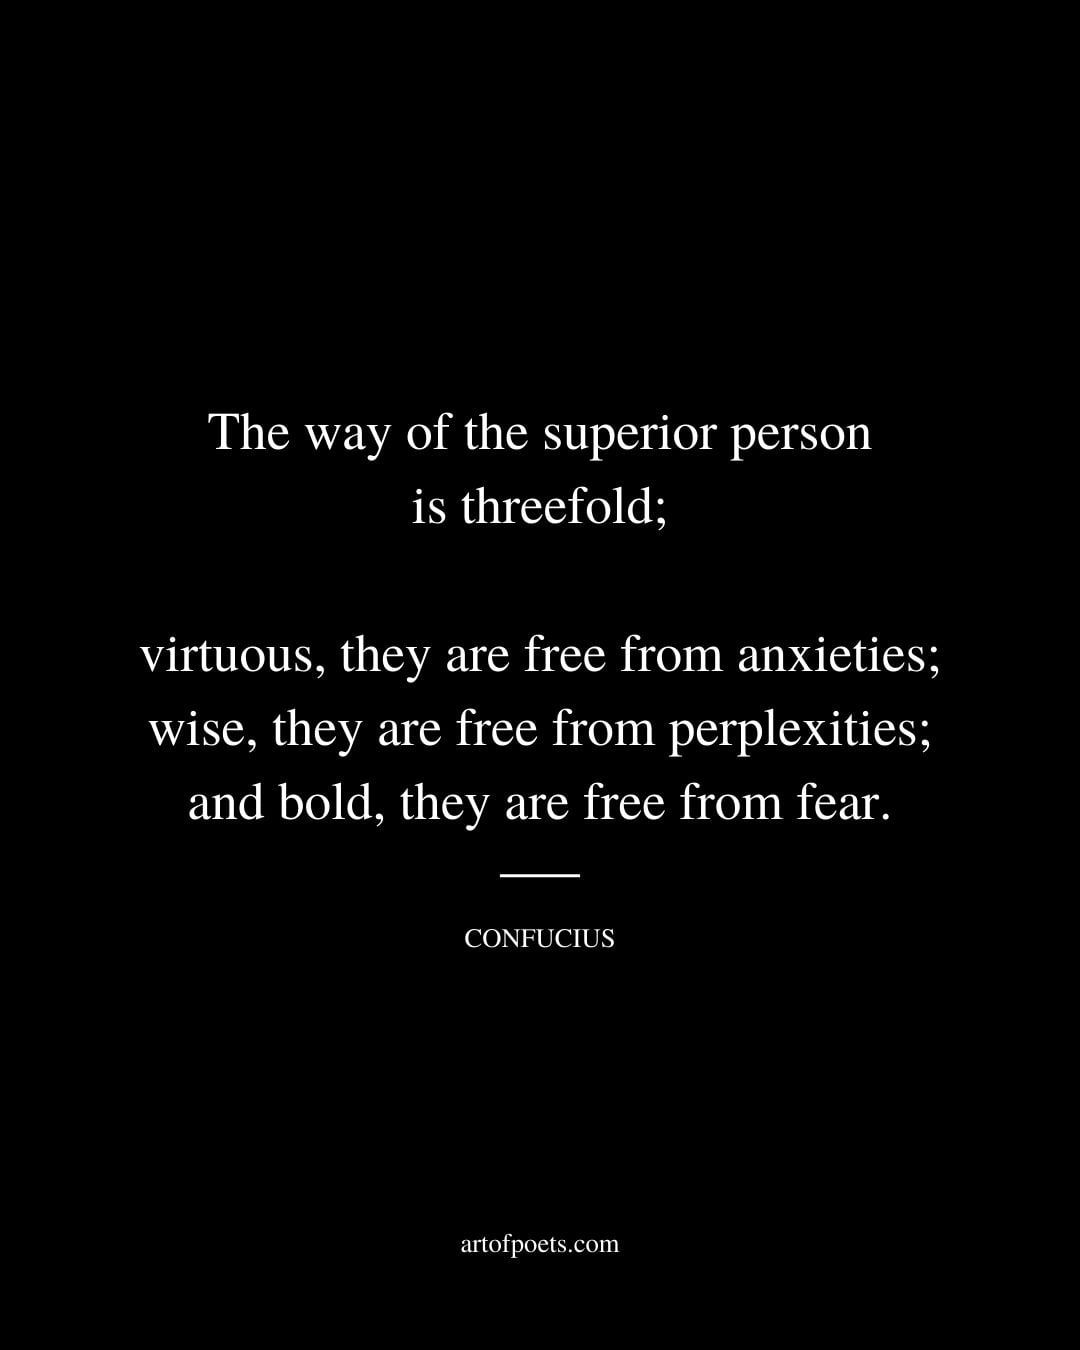 The way of the superior person is threefold virtuous they are free from anxieties wise they are free from perplexities and bold they are free from fear